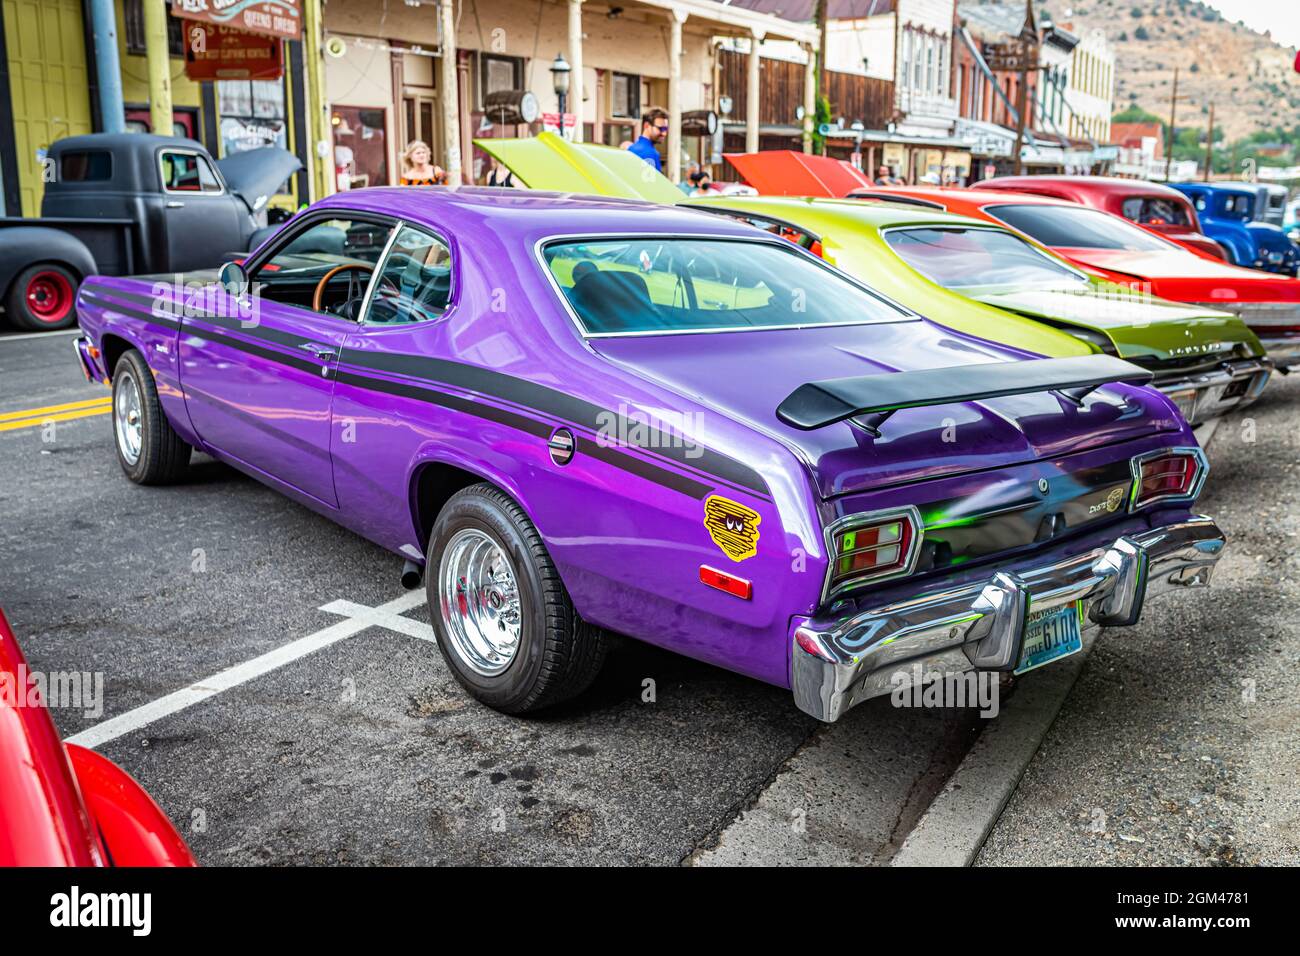 Virginia City, NV - July 30, 2021: 1976 Plymouth Duster Twister Edition at a local car show. Stock Photo